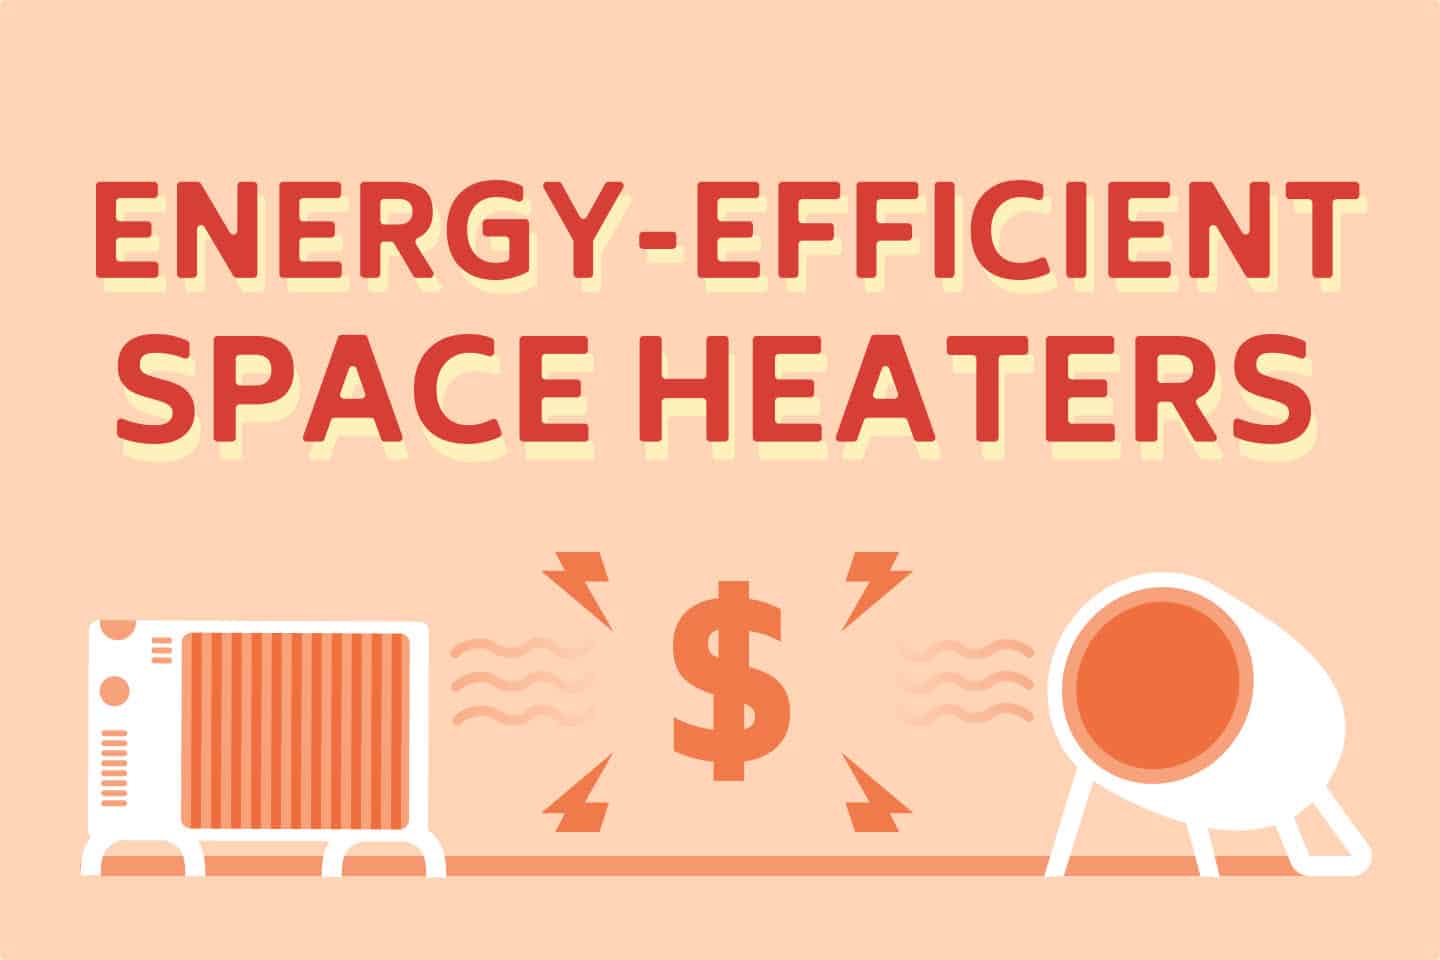 Most Energy-Efficient Space Heaters